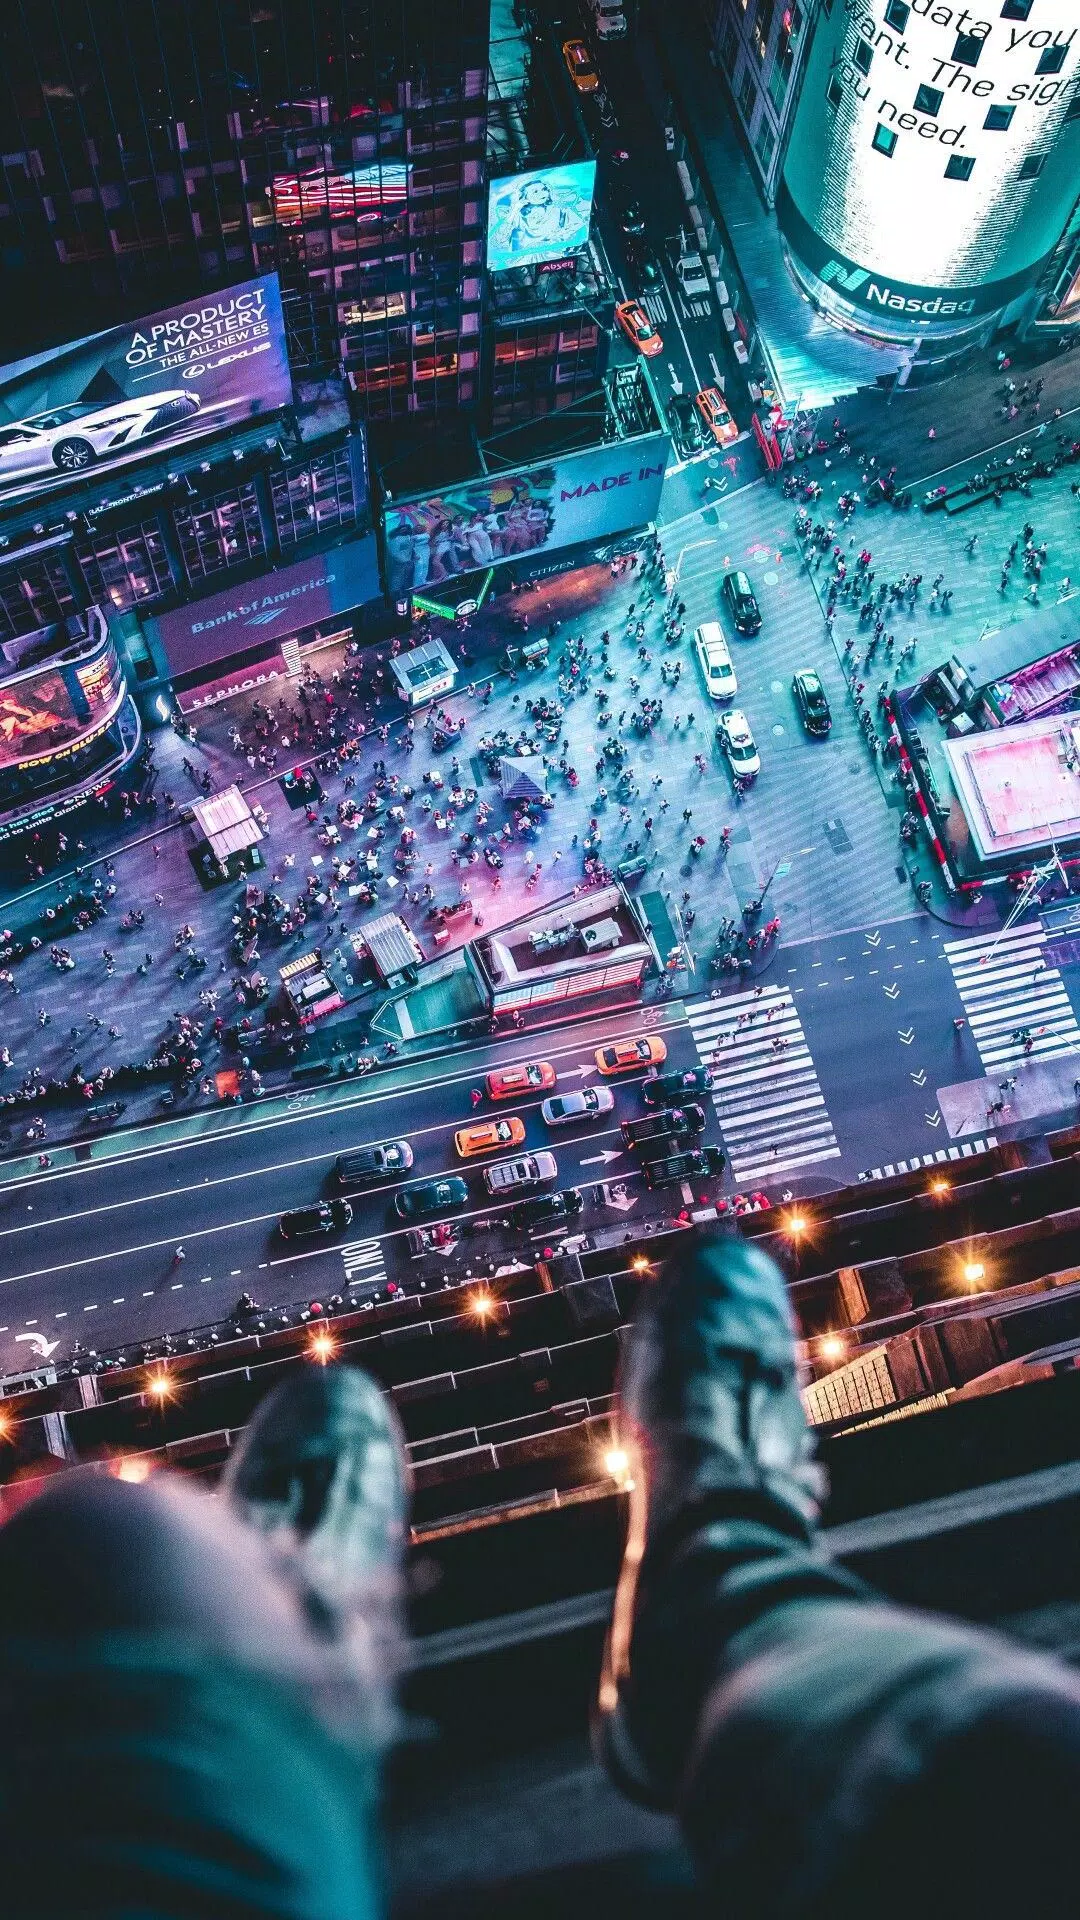 A person sitting on a ledge looking down at a busy city street - Cyberpunk, New York